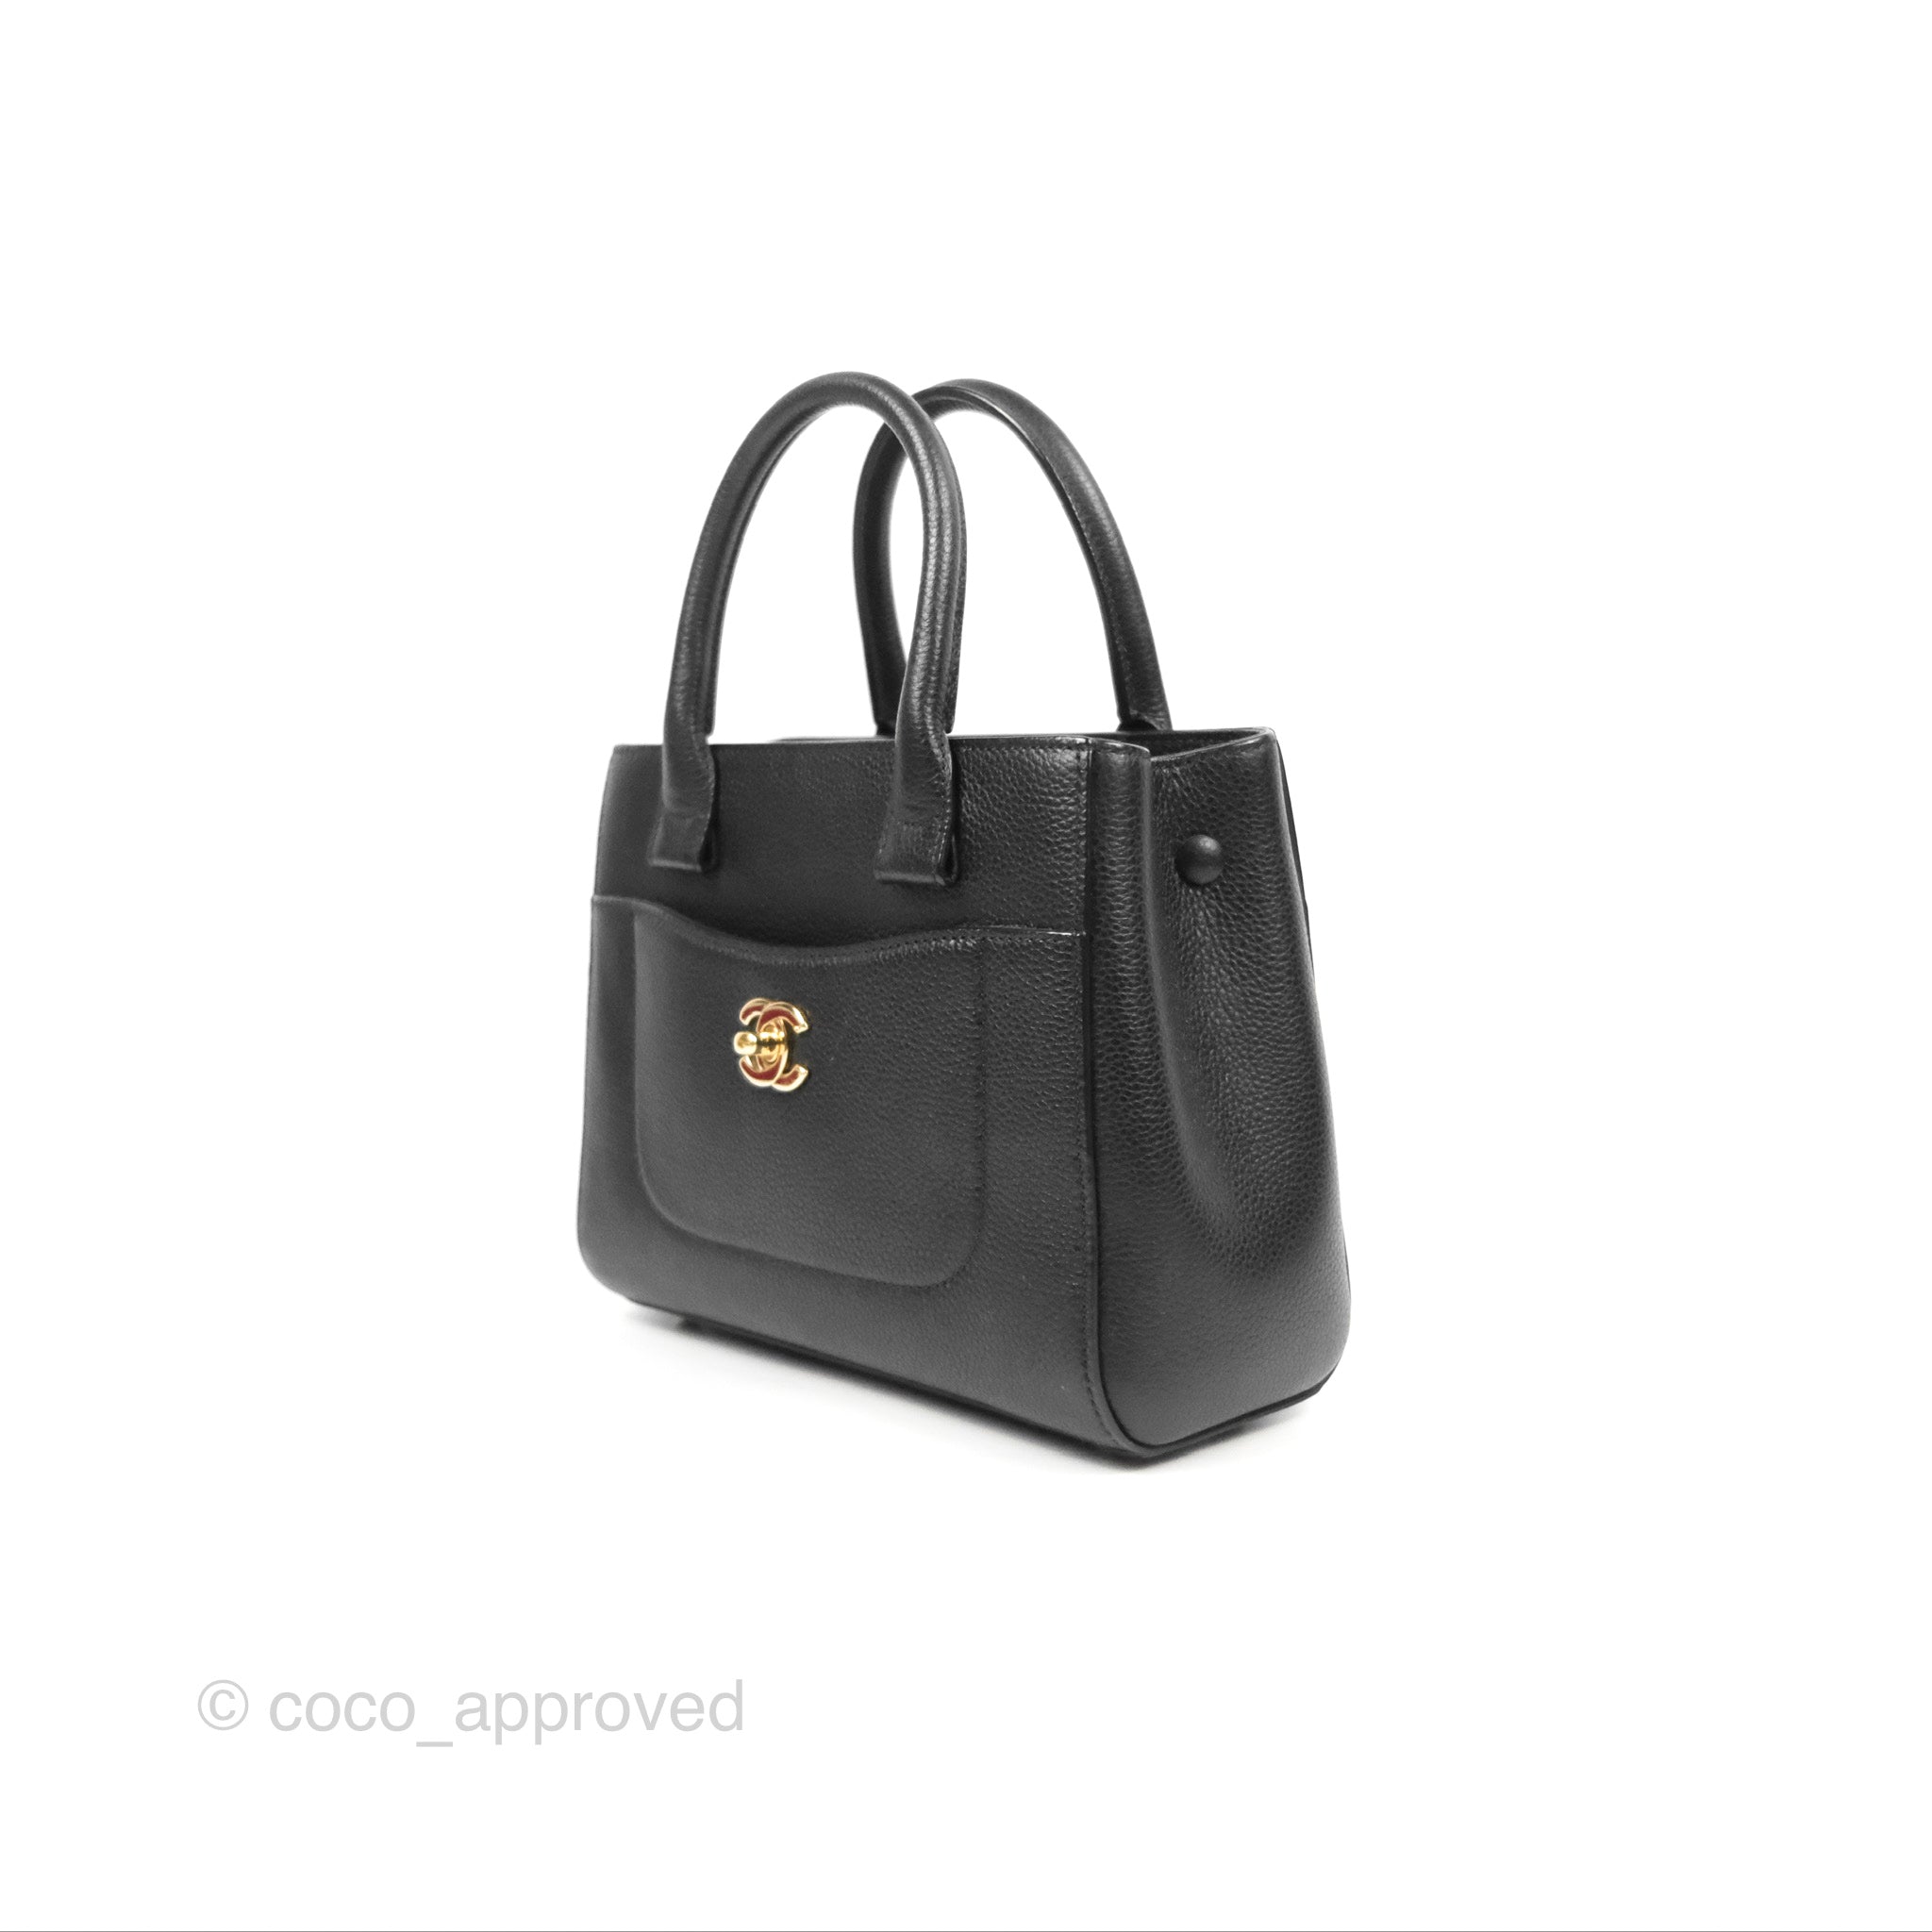 Chanel Grey Large Neo Executive Tote